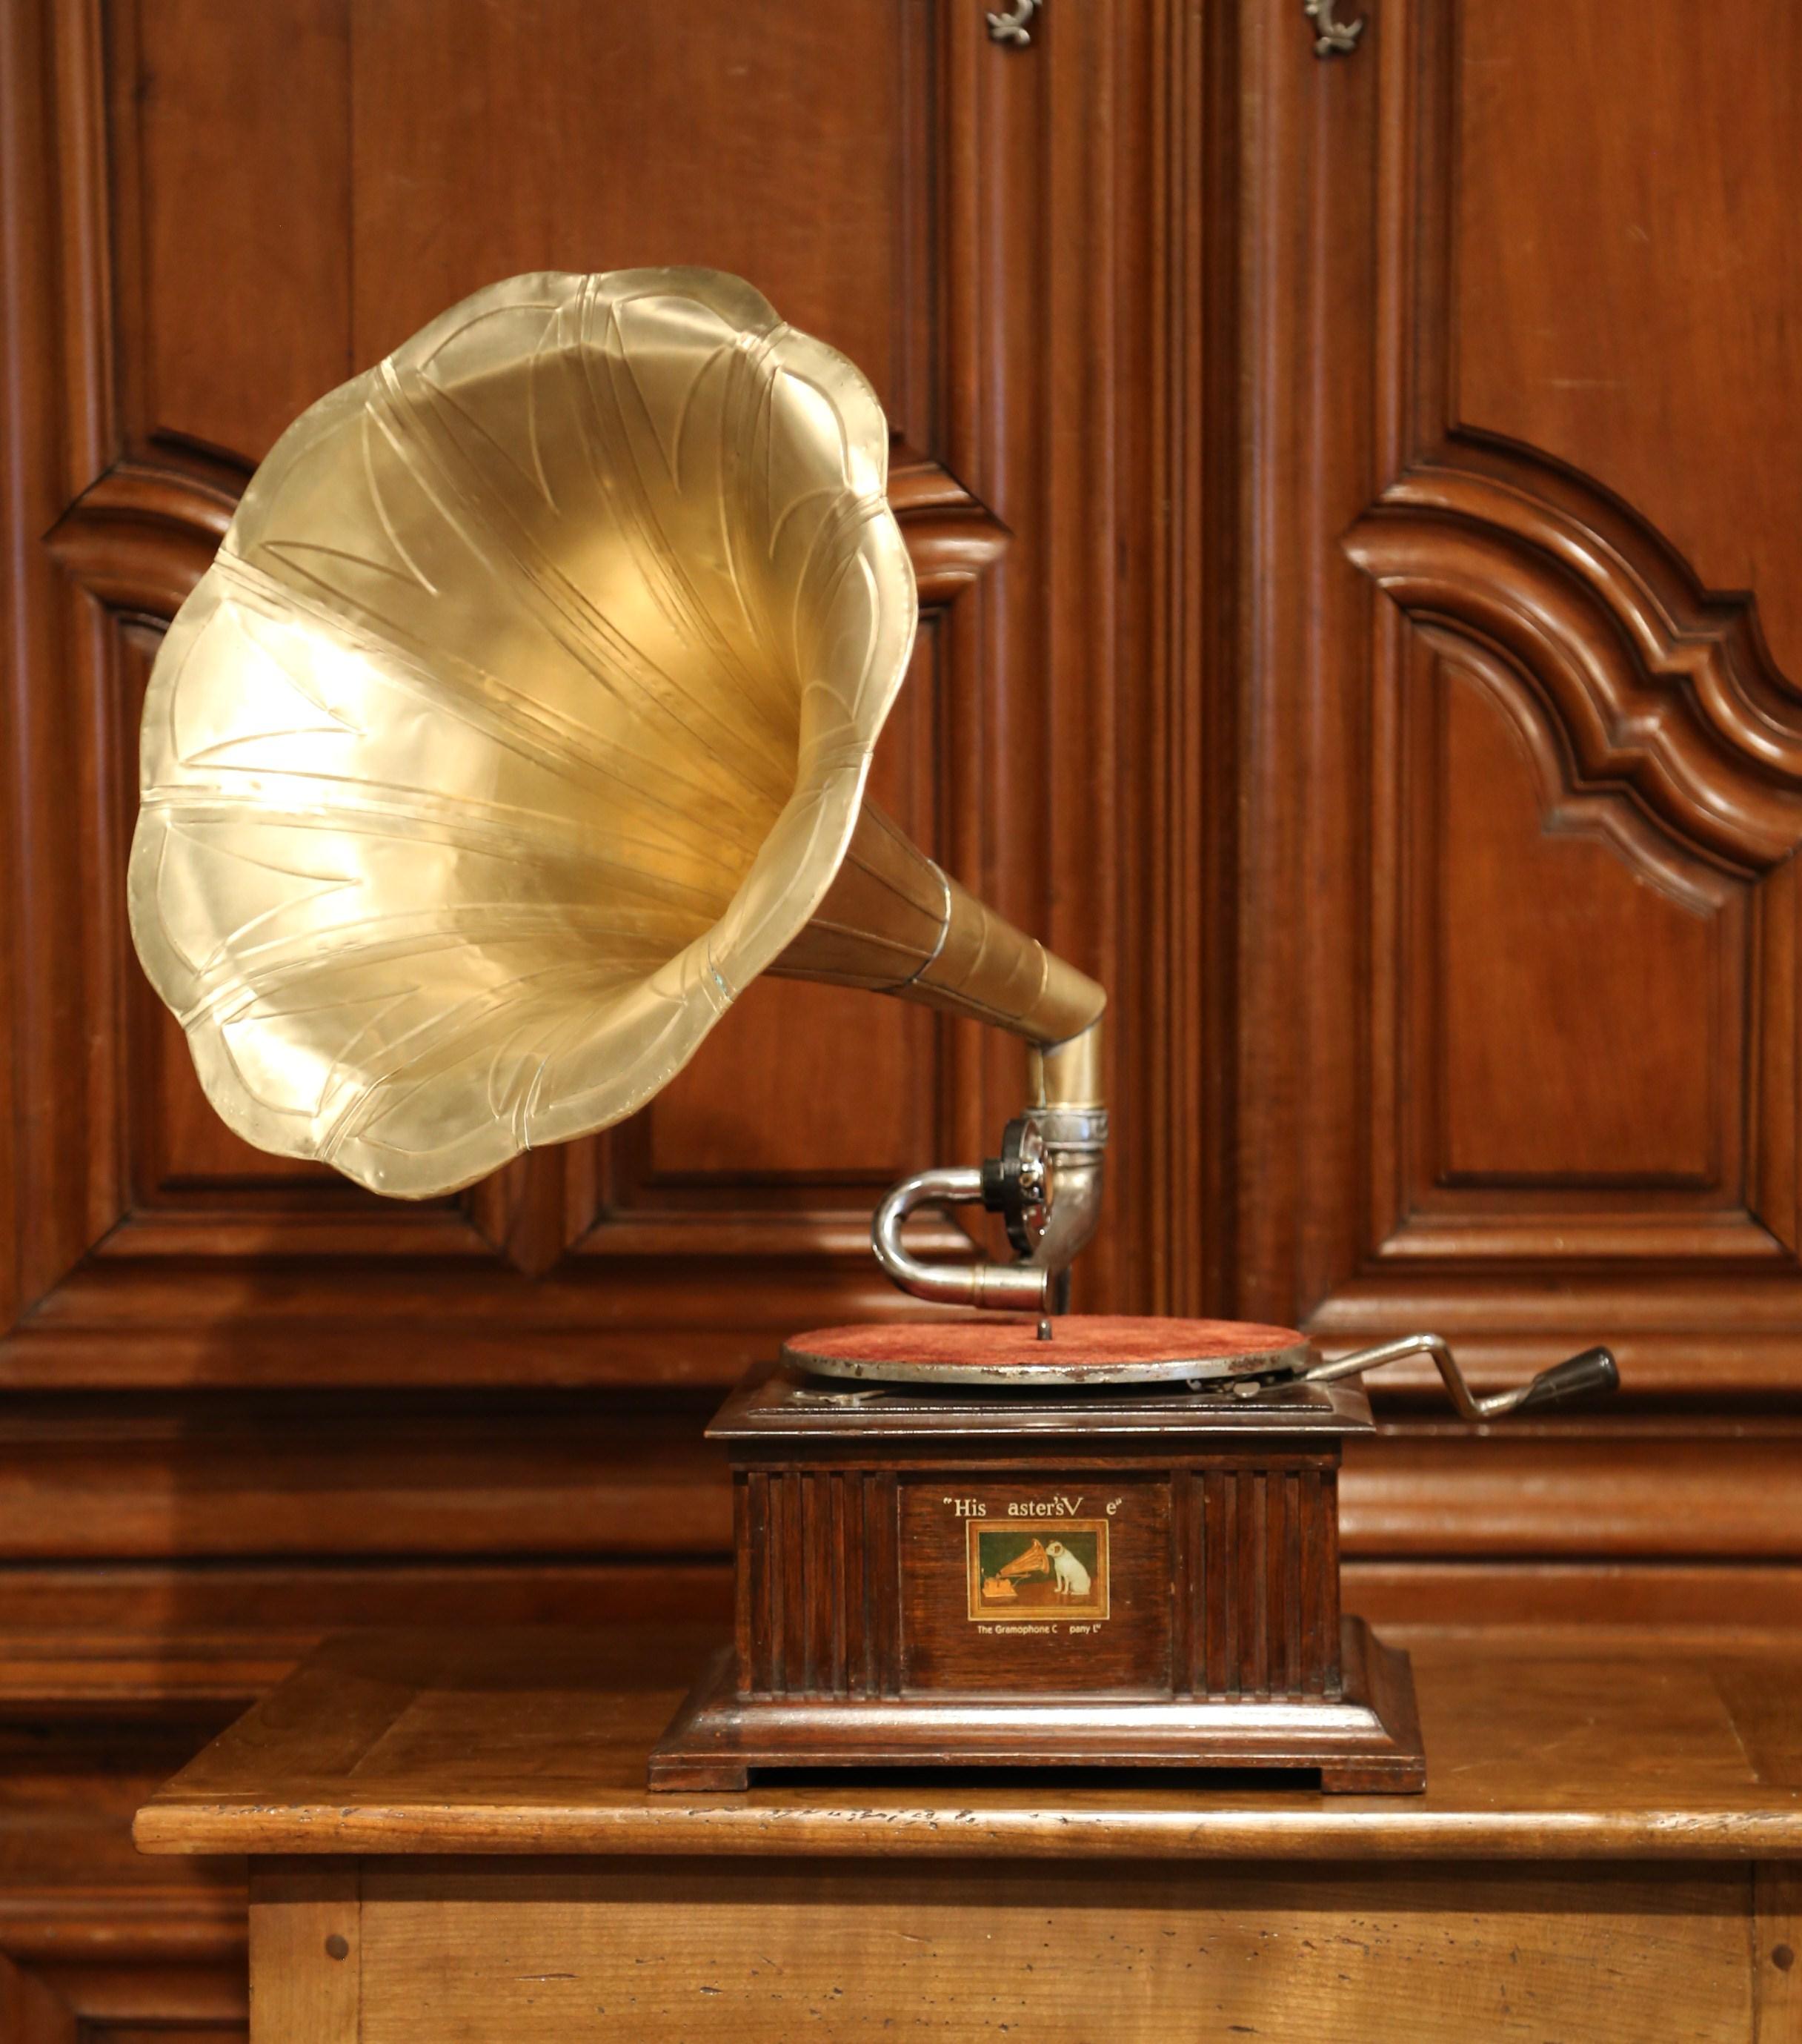 Place this antique gramophone in your study or game room; crafted in England circa 1910, the music box example bears the trademark His Master's Voice decal with Nipper the dog and a detached fluted brass horn. The cast metal horn bracket features a